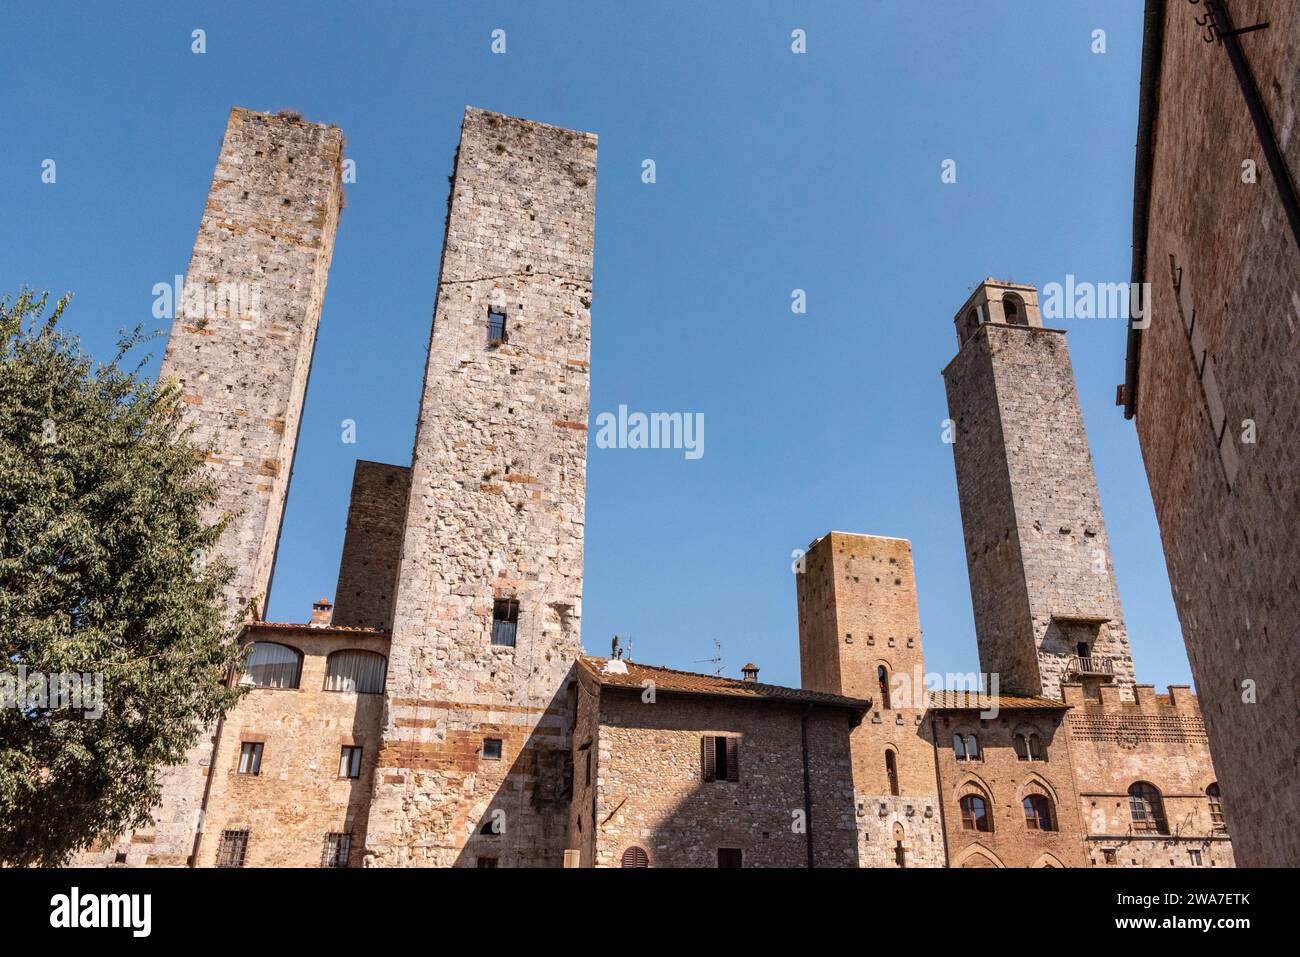 View of the towers Pettini and Salvucci in San Gimignano, Italy Stock Photo